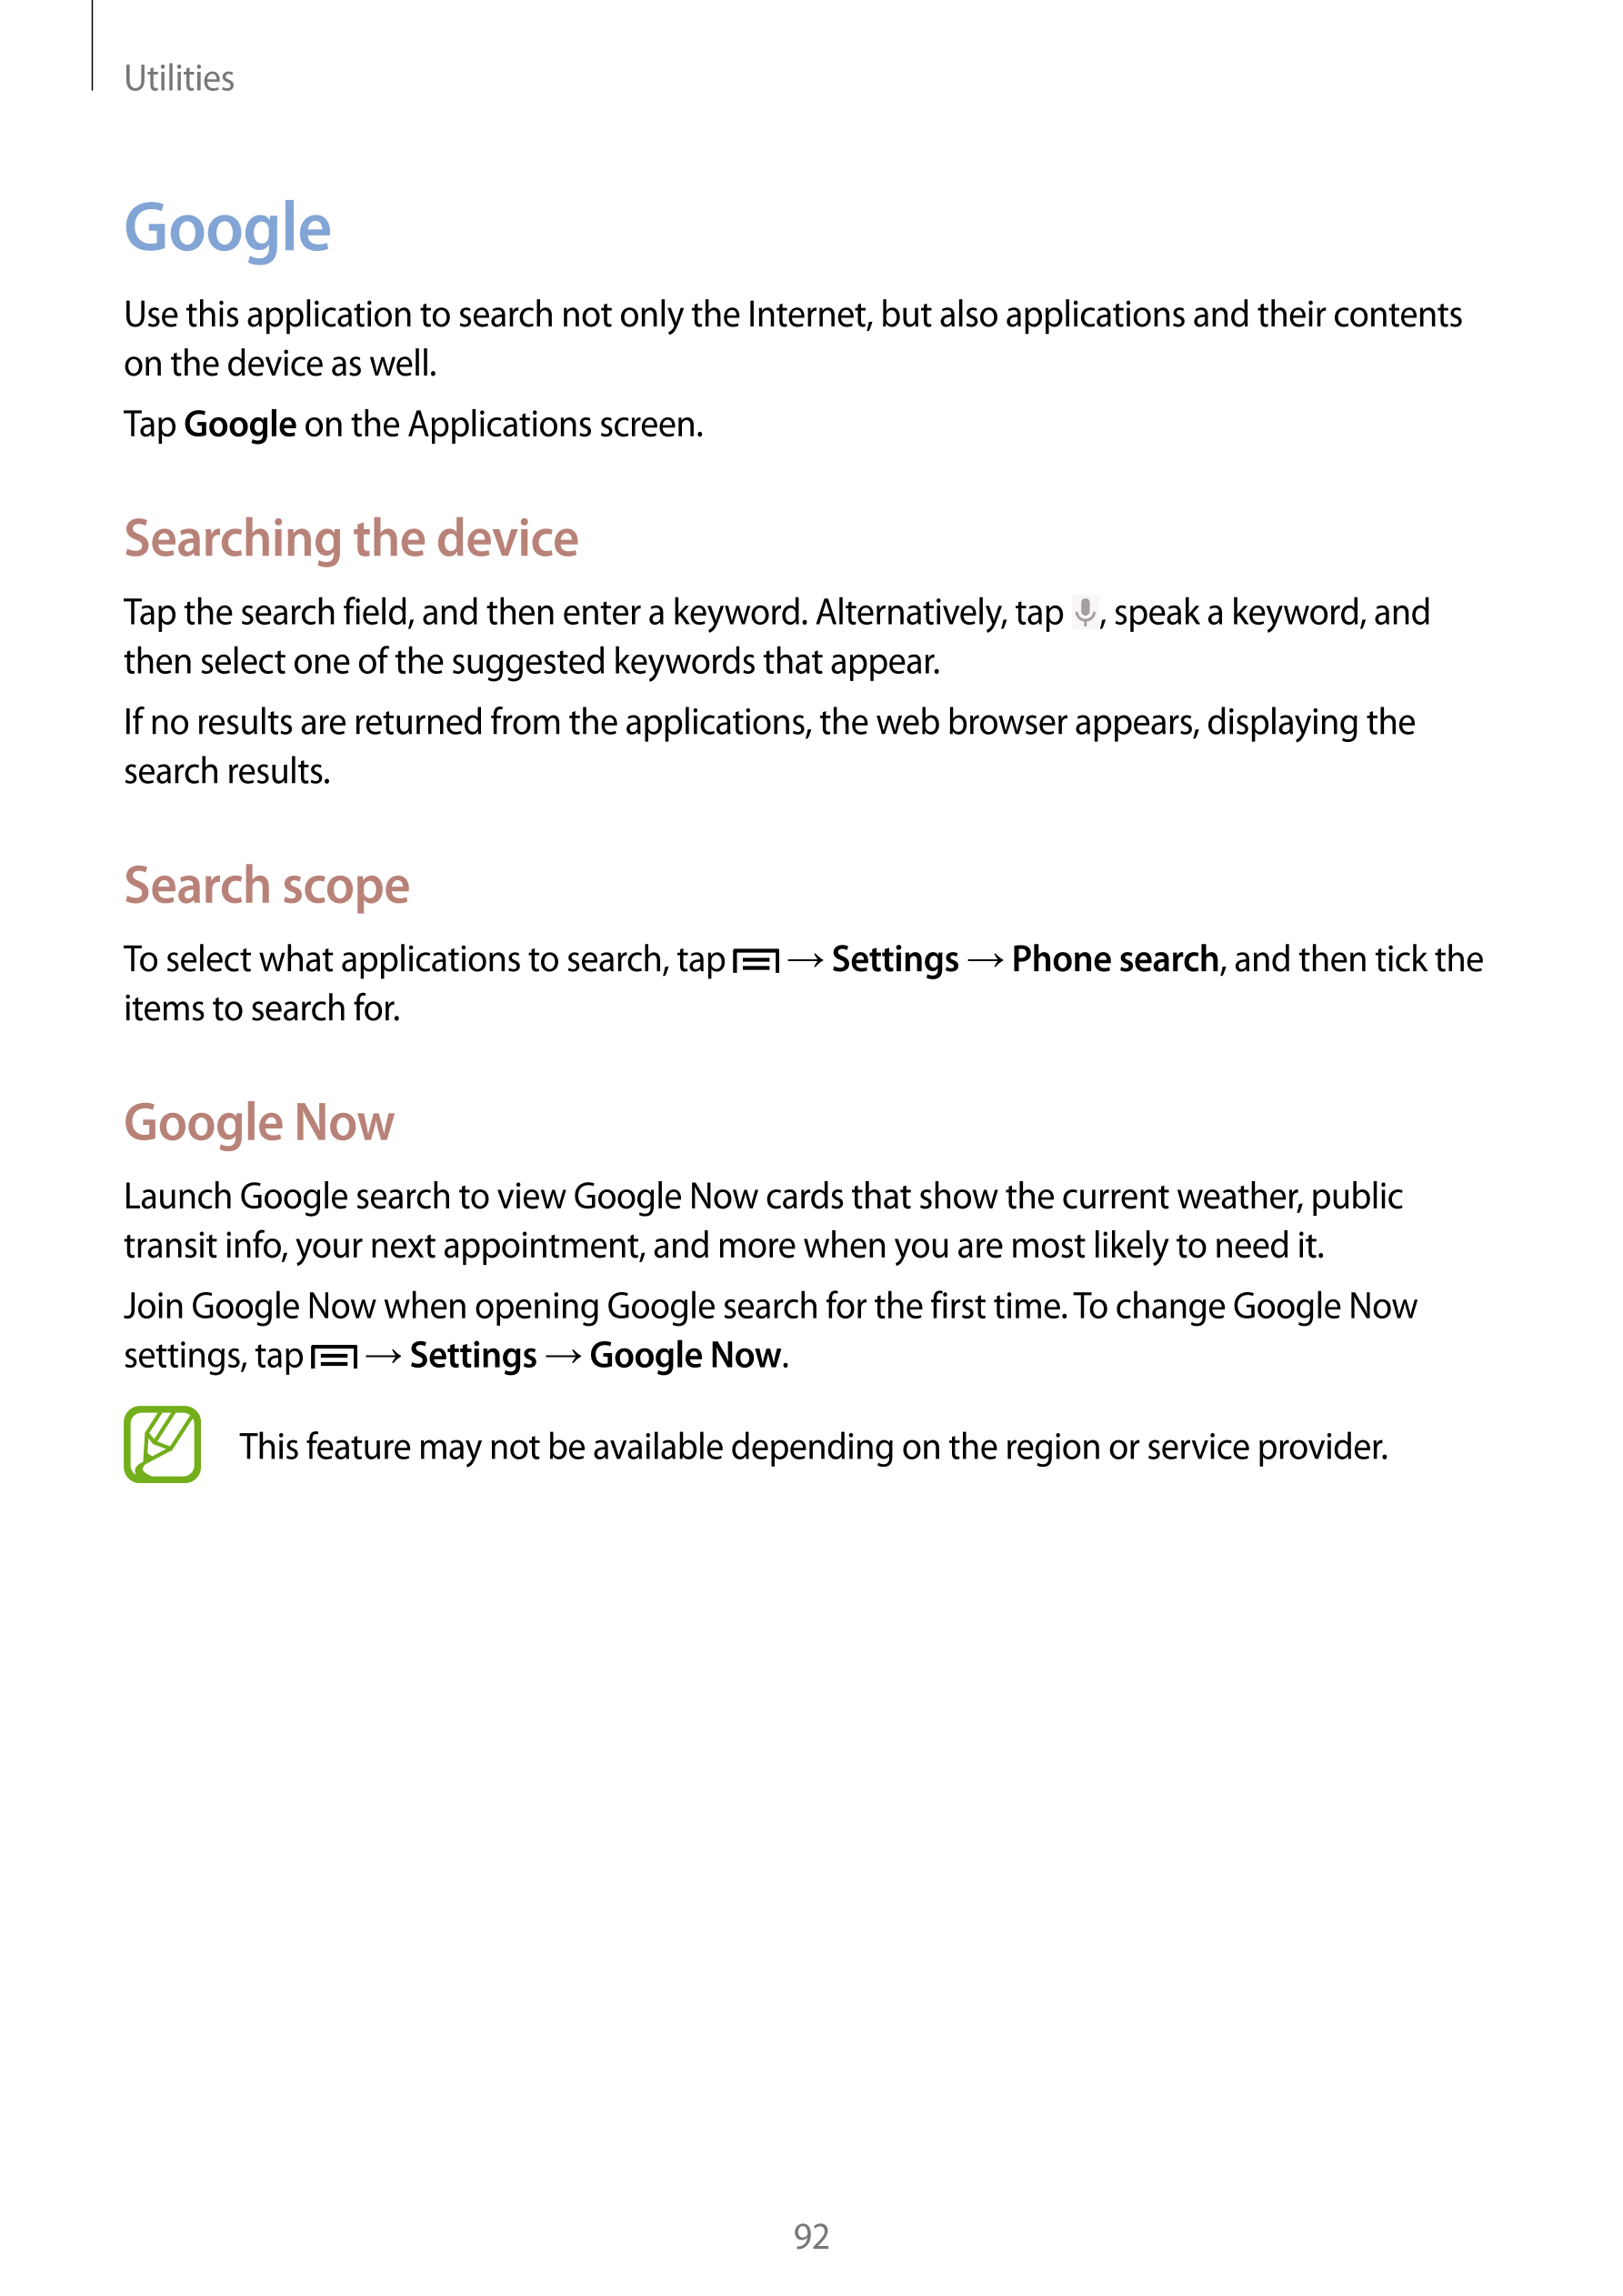 Utilities
Google
Use this application to search not only the Internet, but also applications and their contents 
on the device a